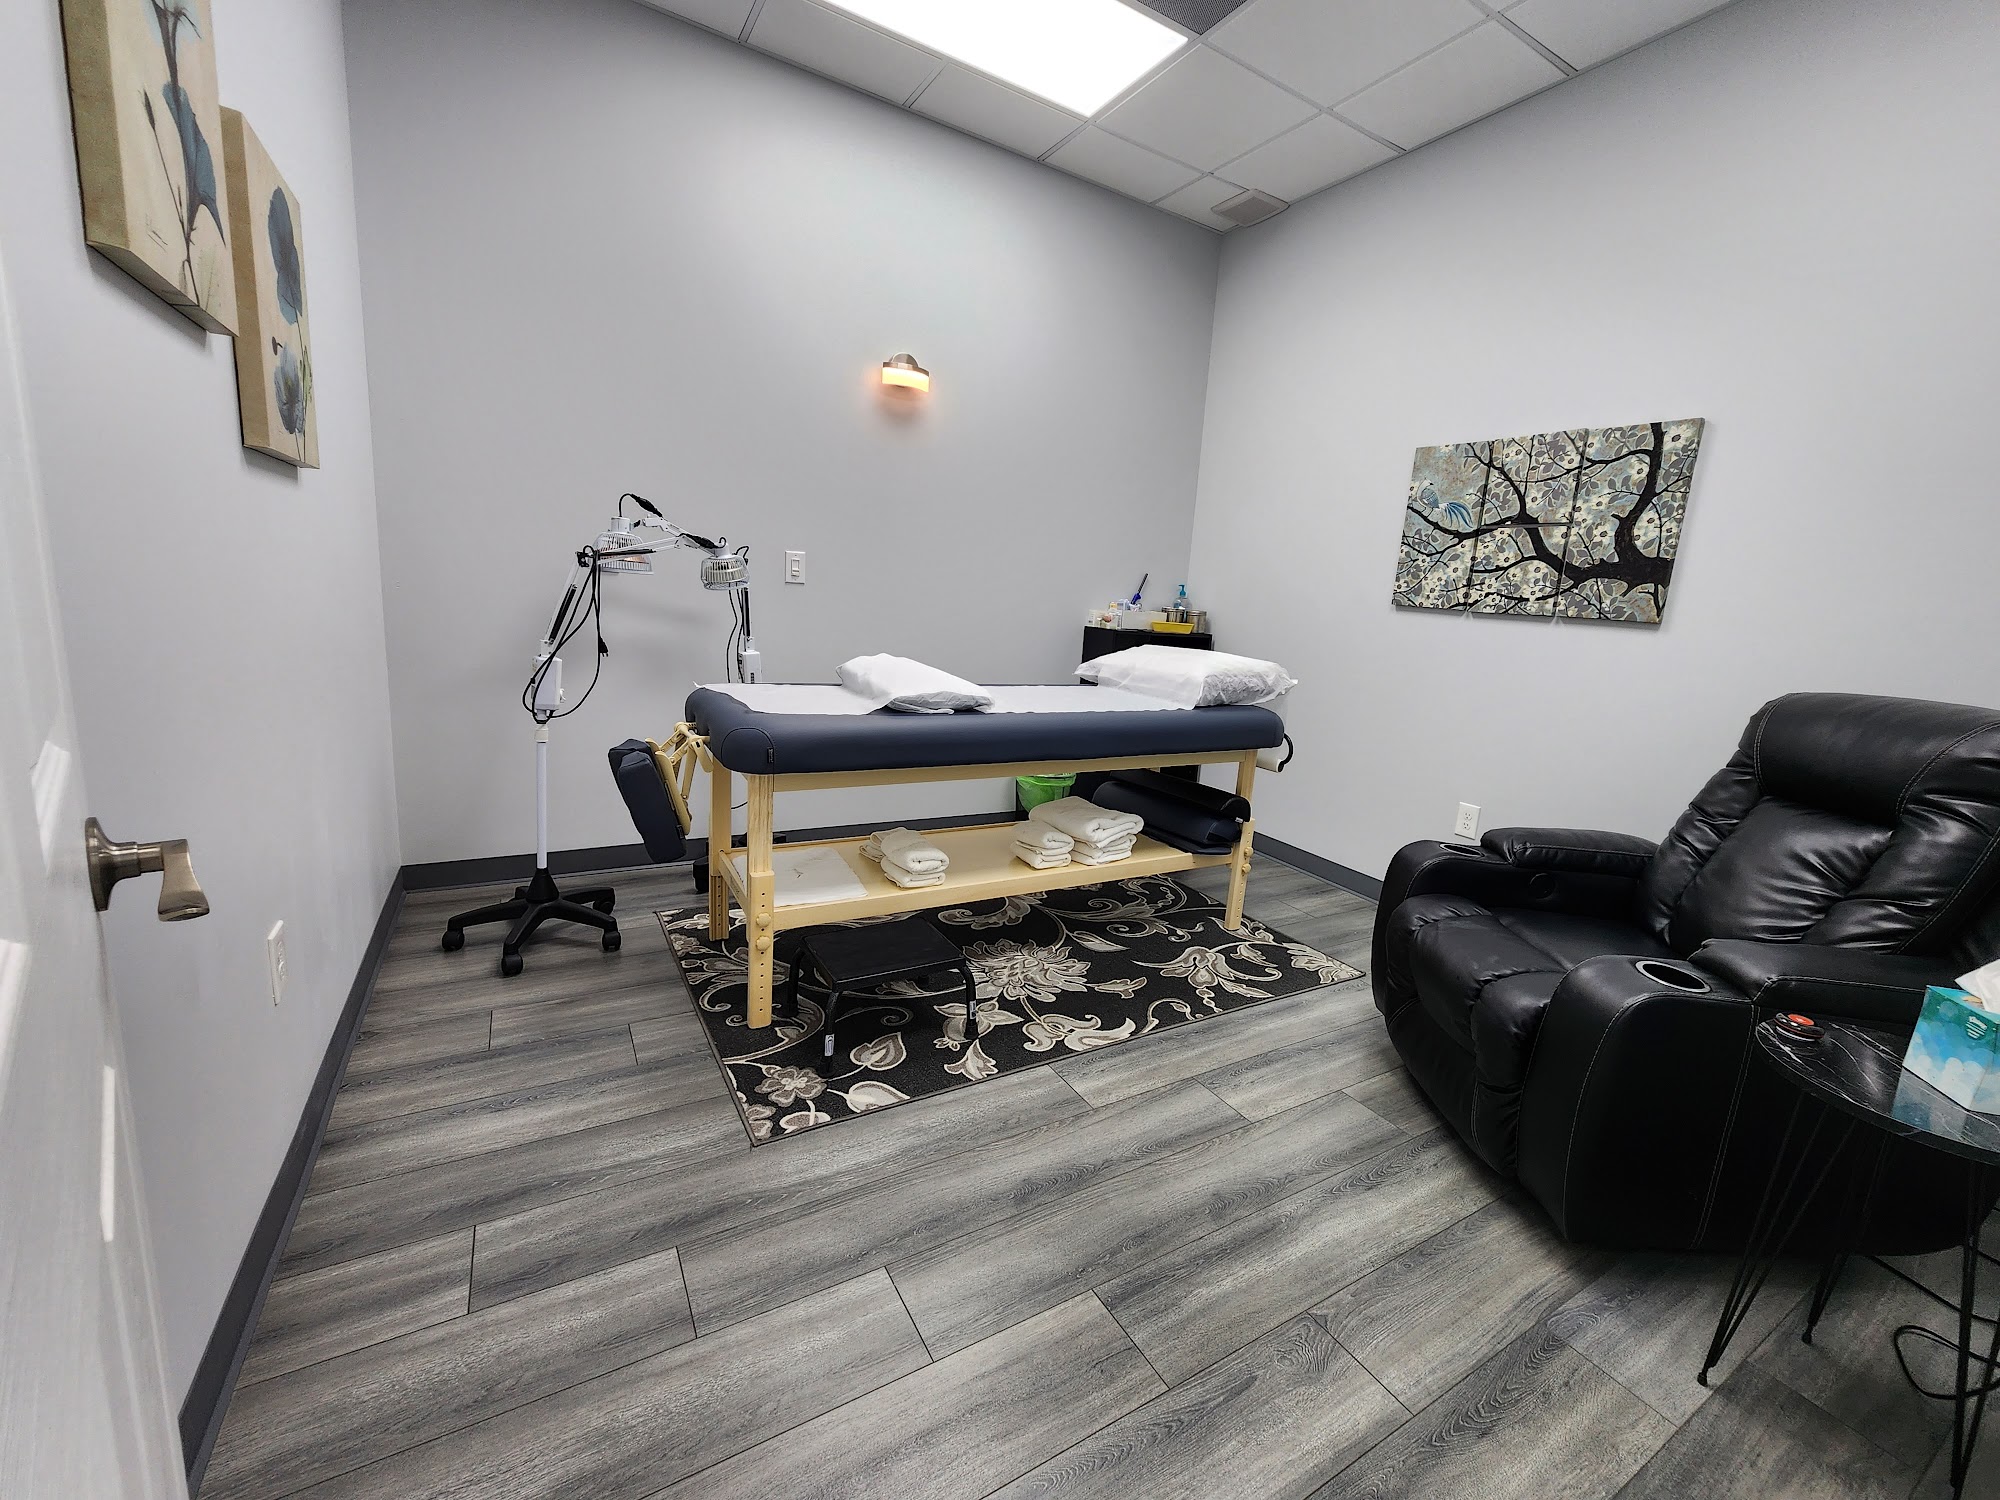 Pecan Grove Acupuncture & Wellness Clinic